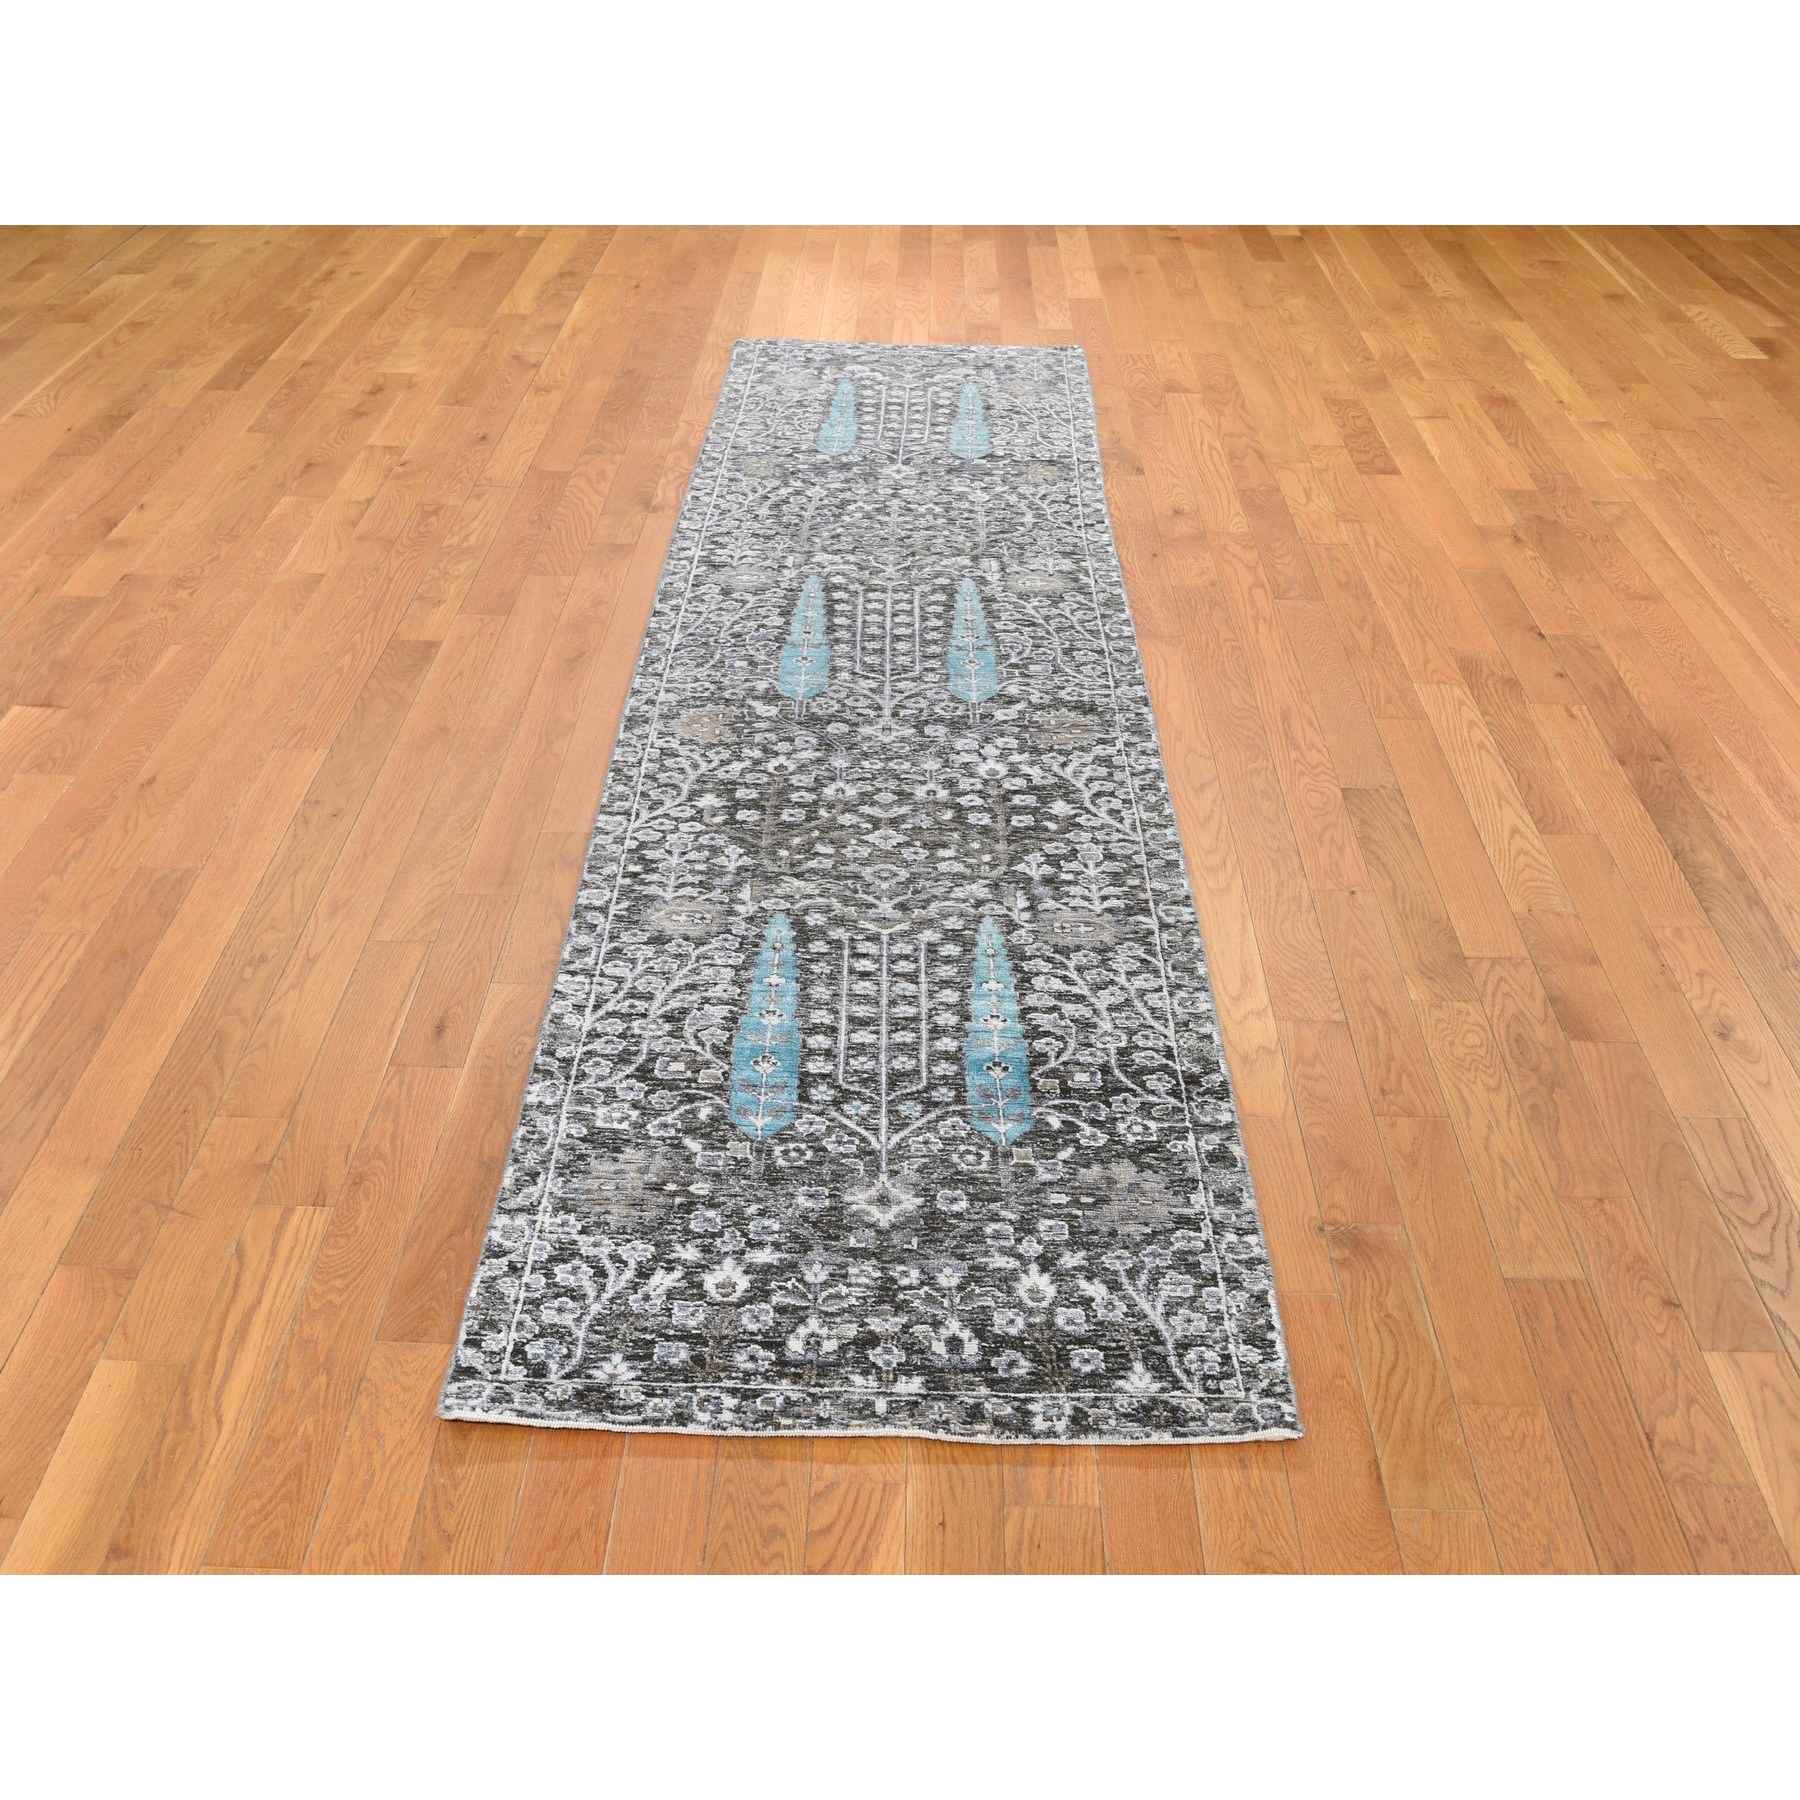 2'7"x10'1" Charcoal Black Cypress Tree Design Silk with Textured Wool Hand Woven Runner Oriental Rug 